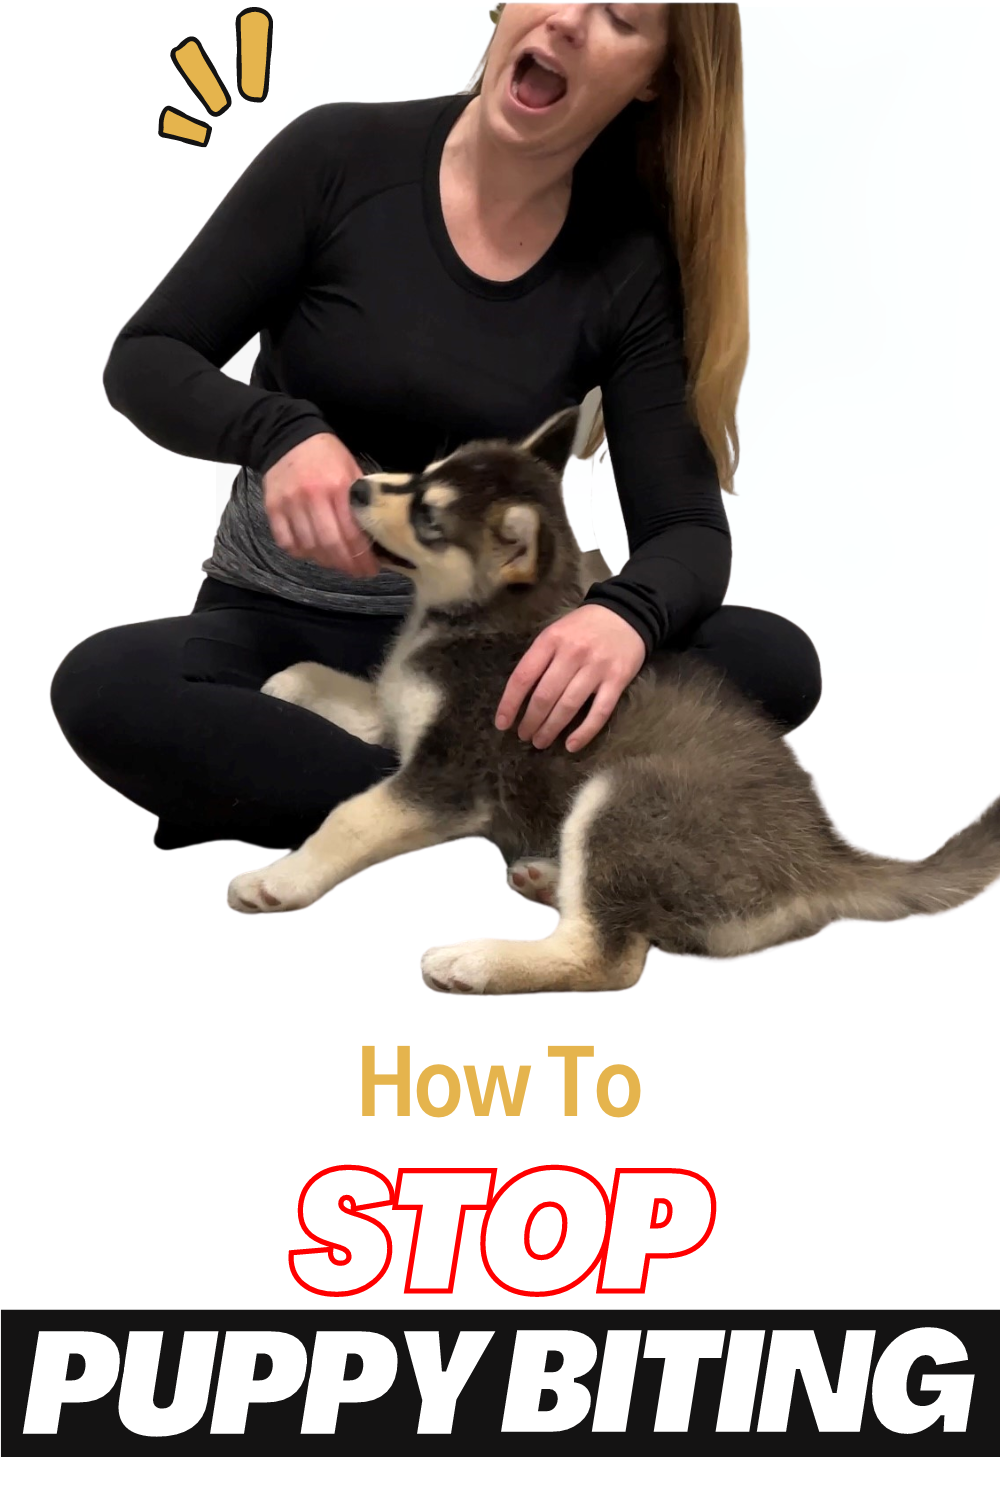 How to stop puppy biting